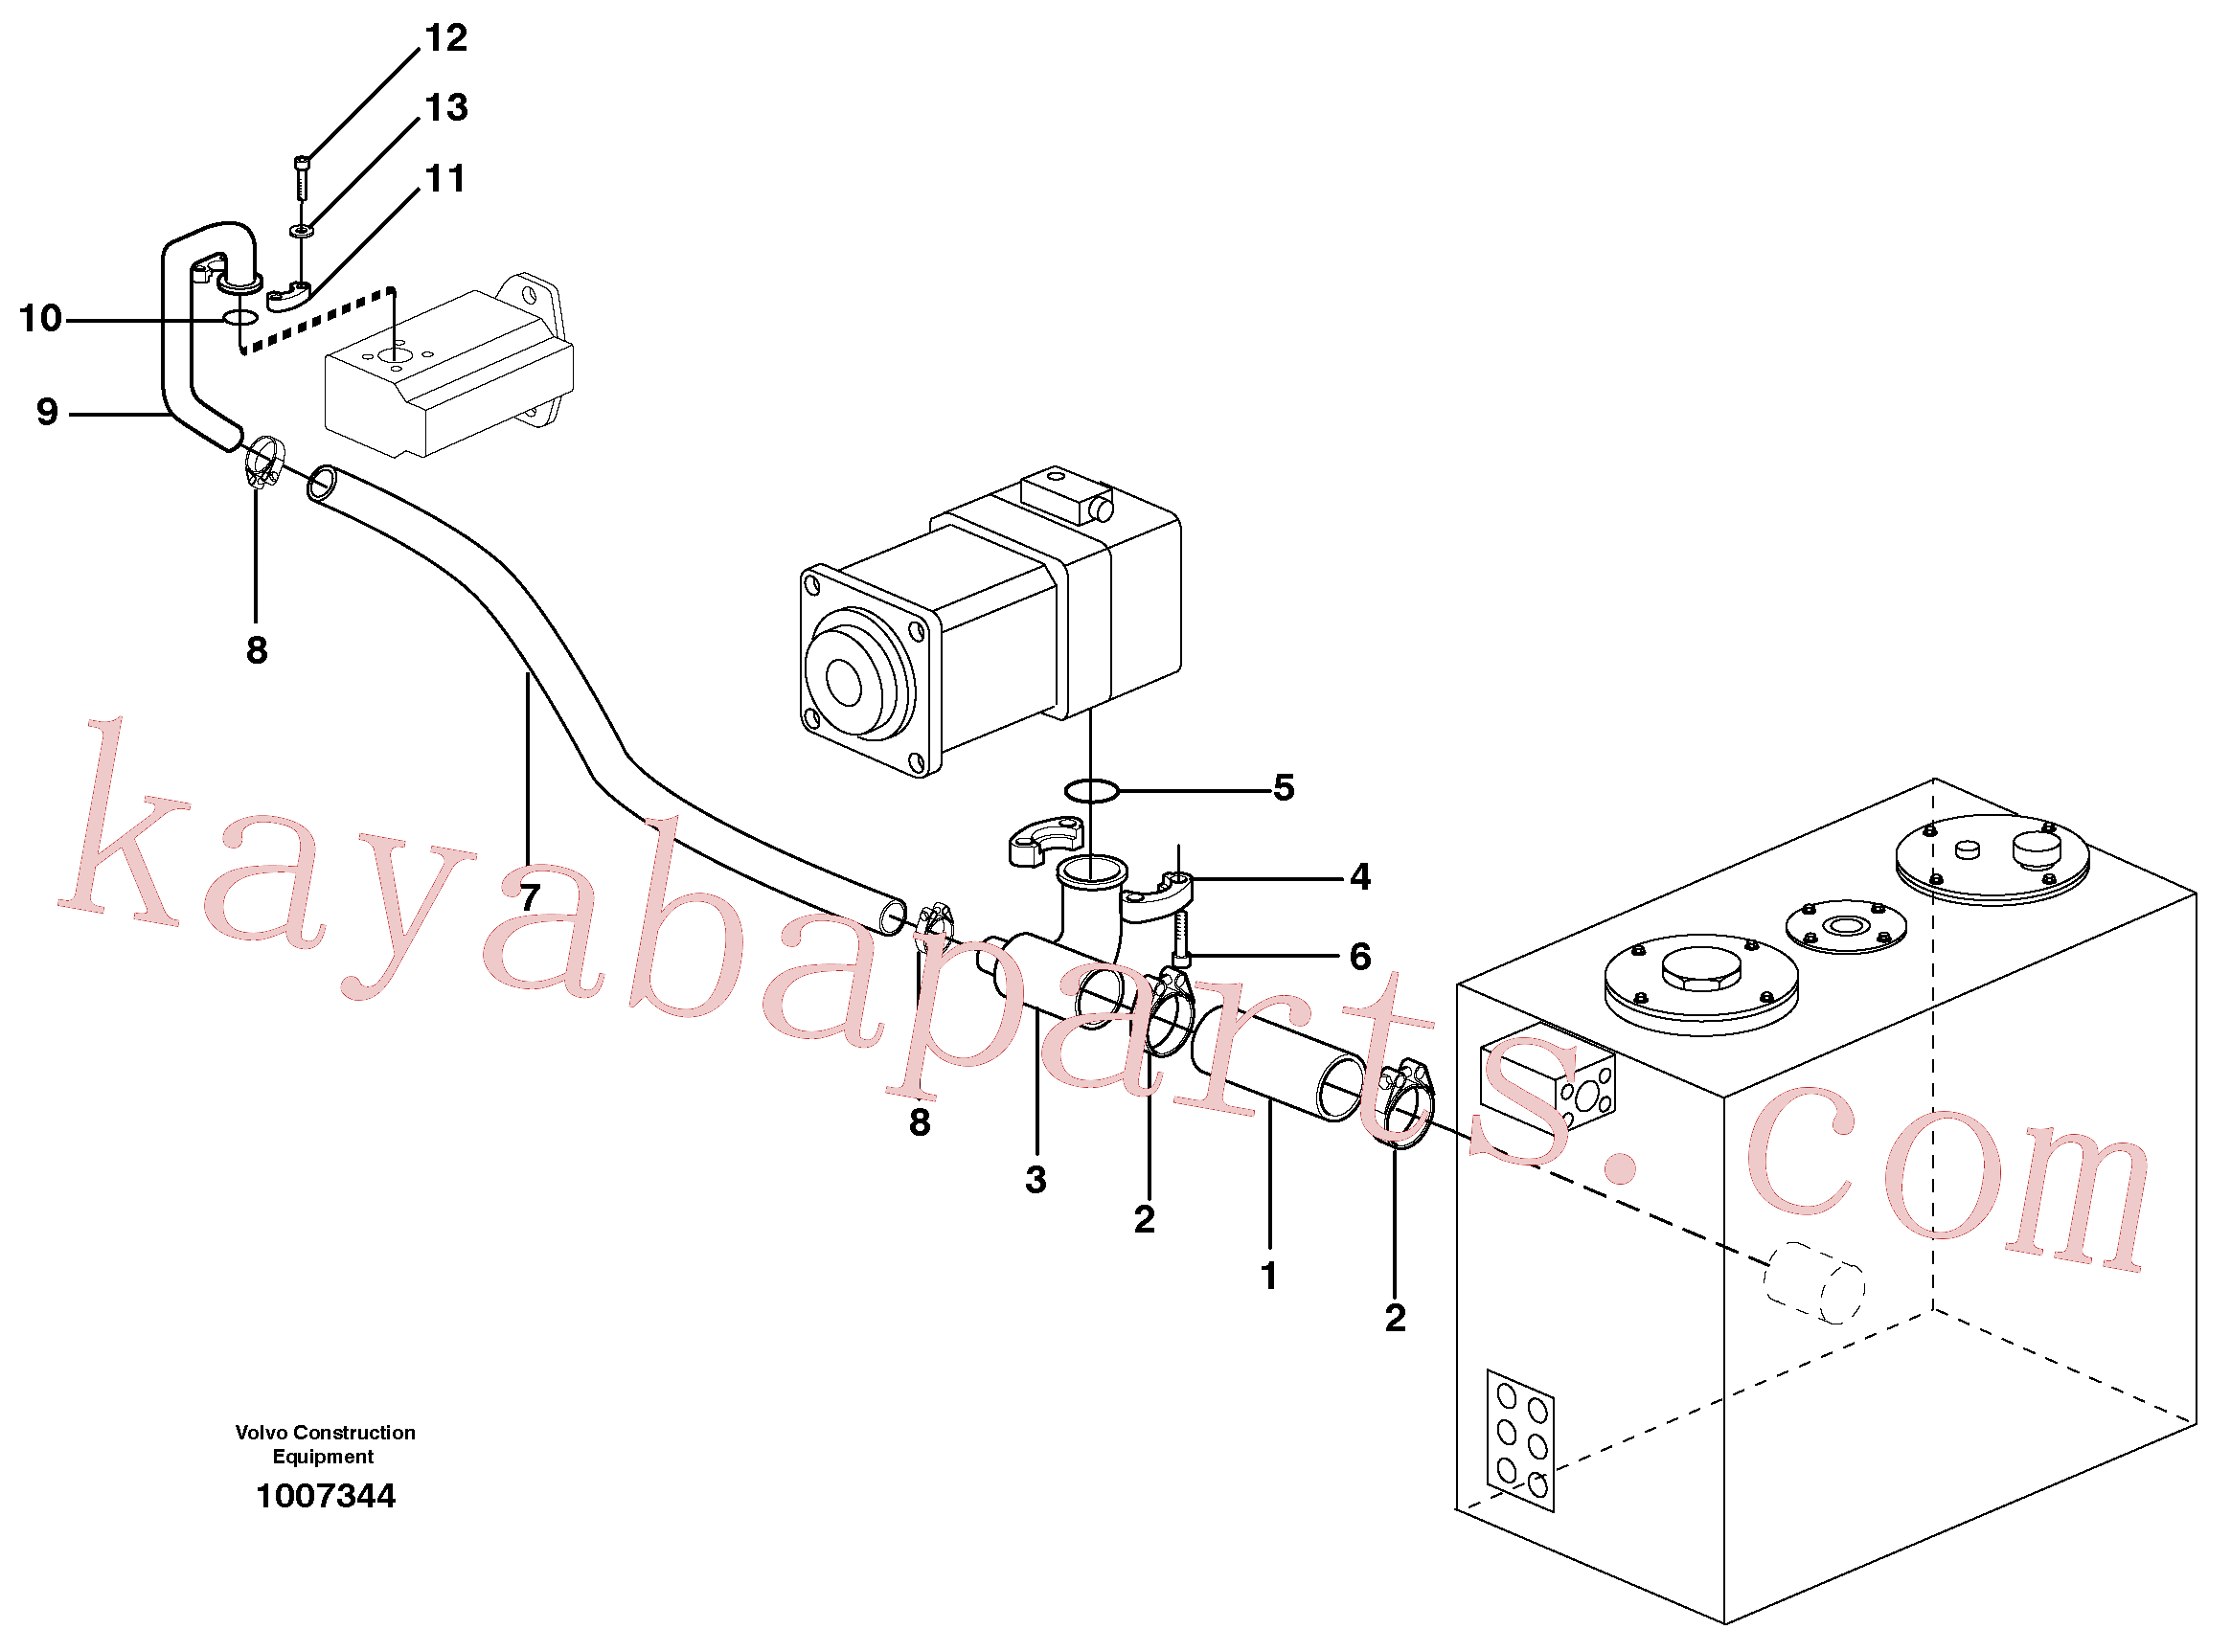 VOE993327 for Volvo Hydraulic system suction lines(1007344 assembly)